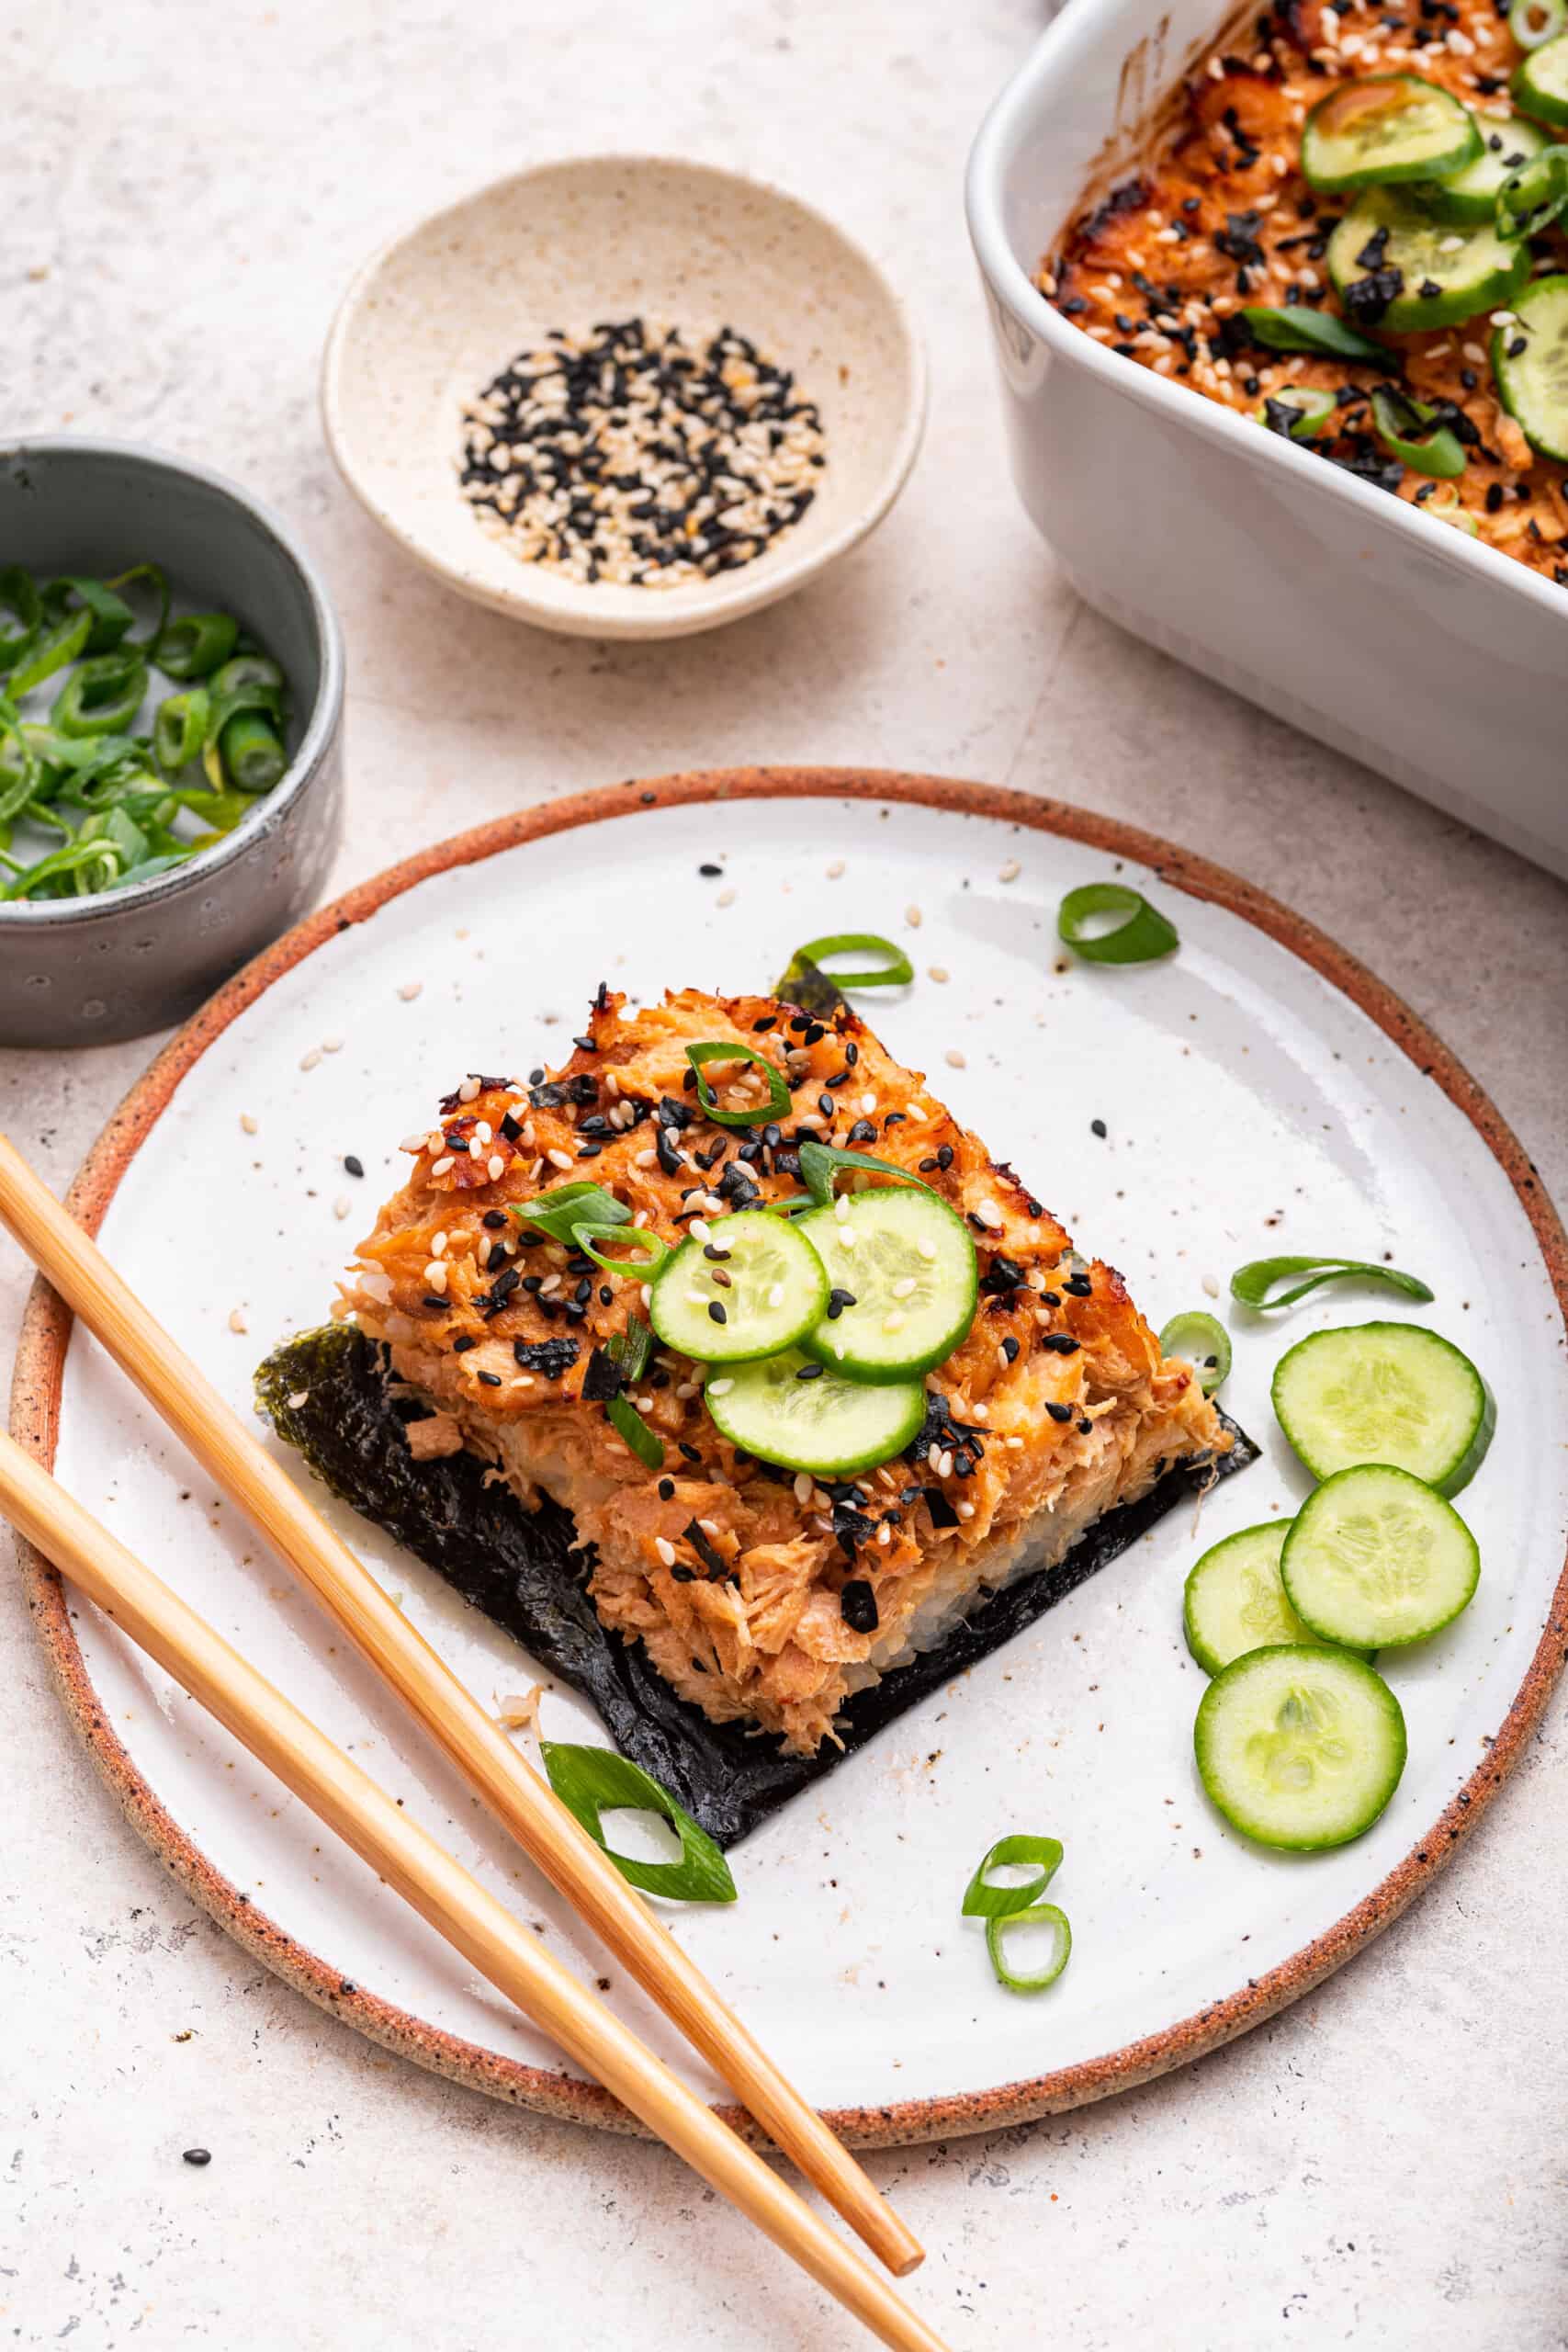 Salmon sushi bake on plate with sliced cucumbers, nori, and green onions